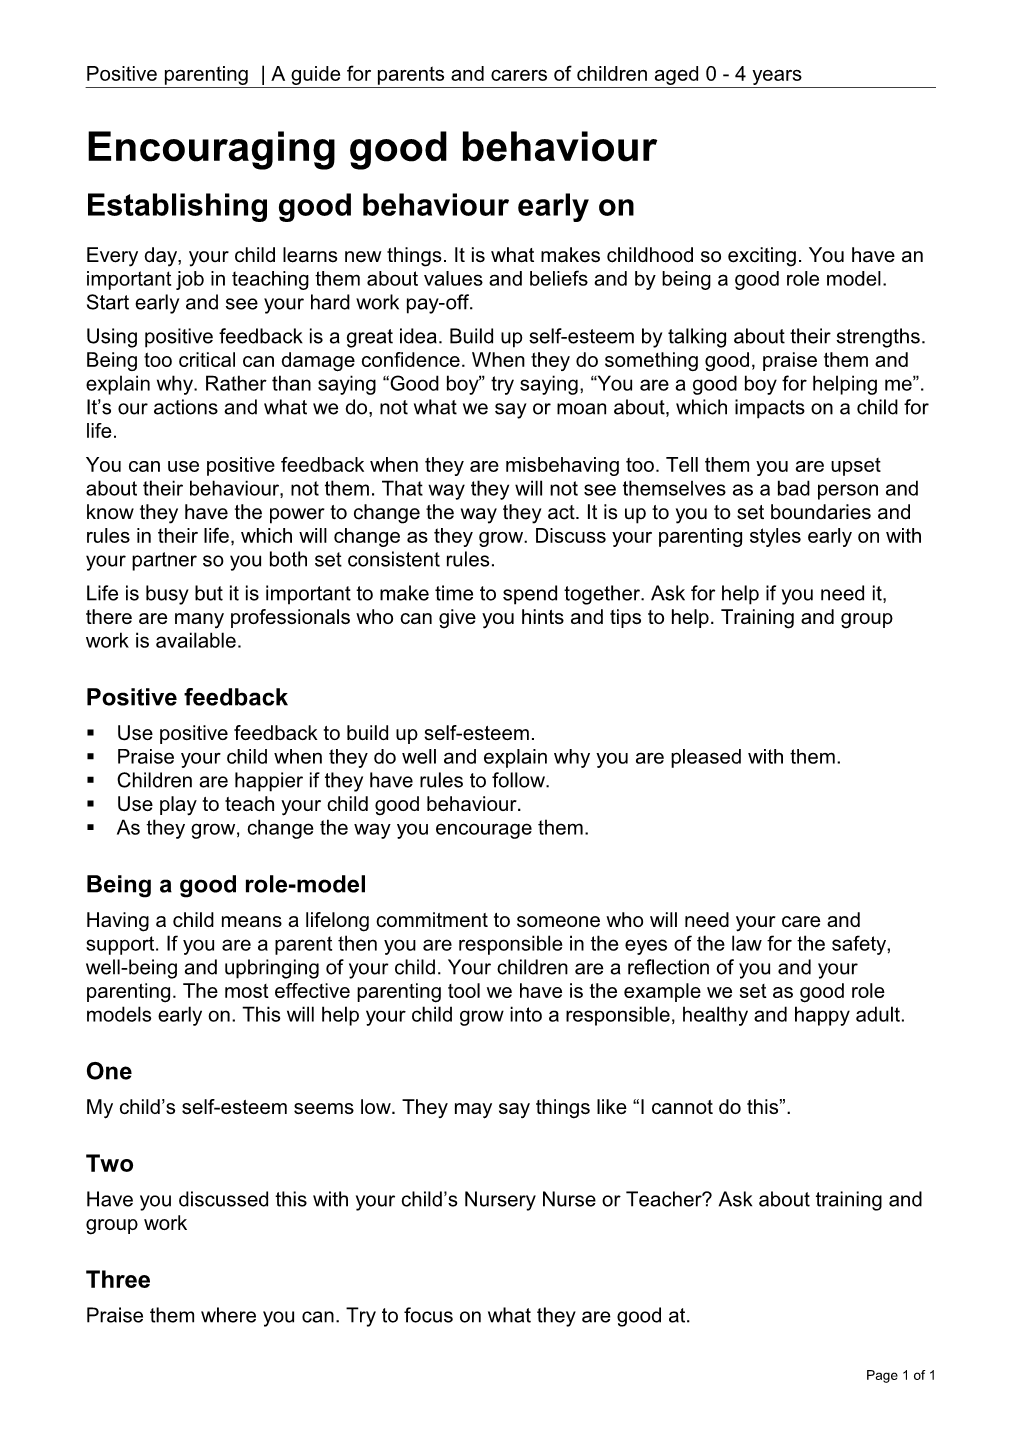 Positive Parenting a Guide for Parents and Carers of Children Aged 0 - 4 Years